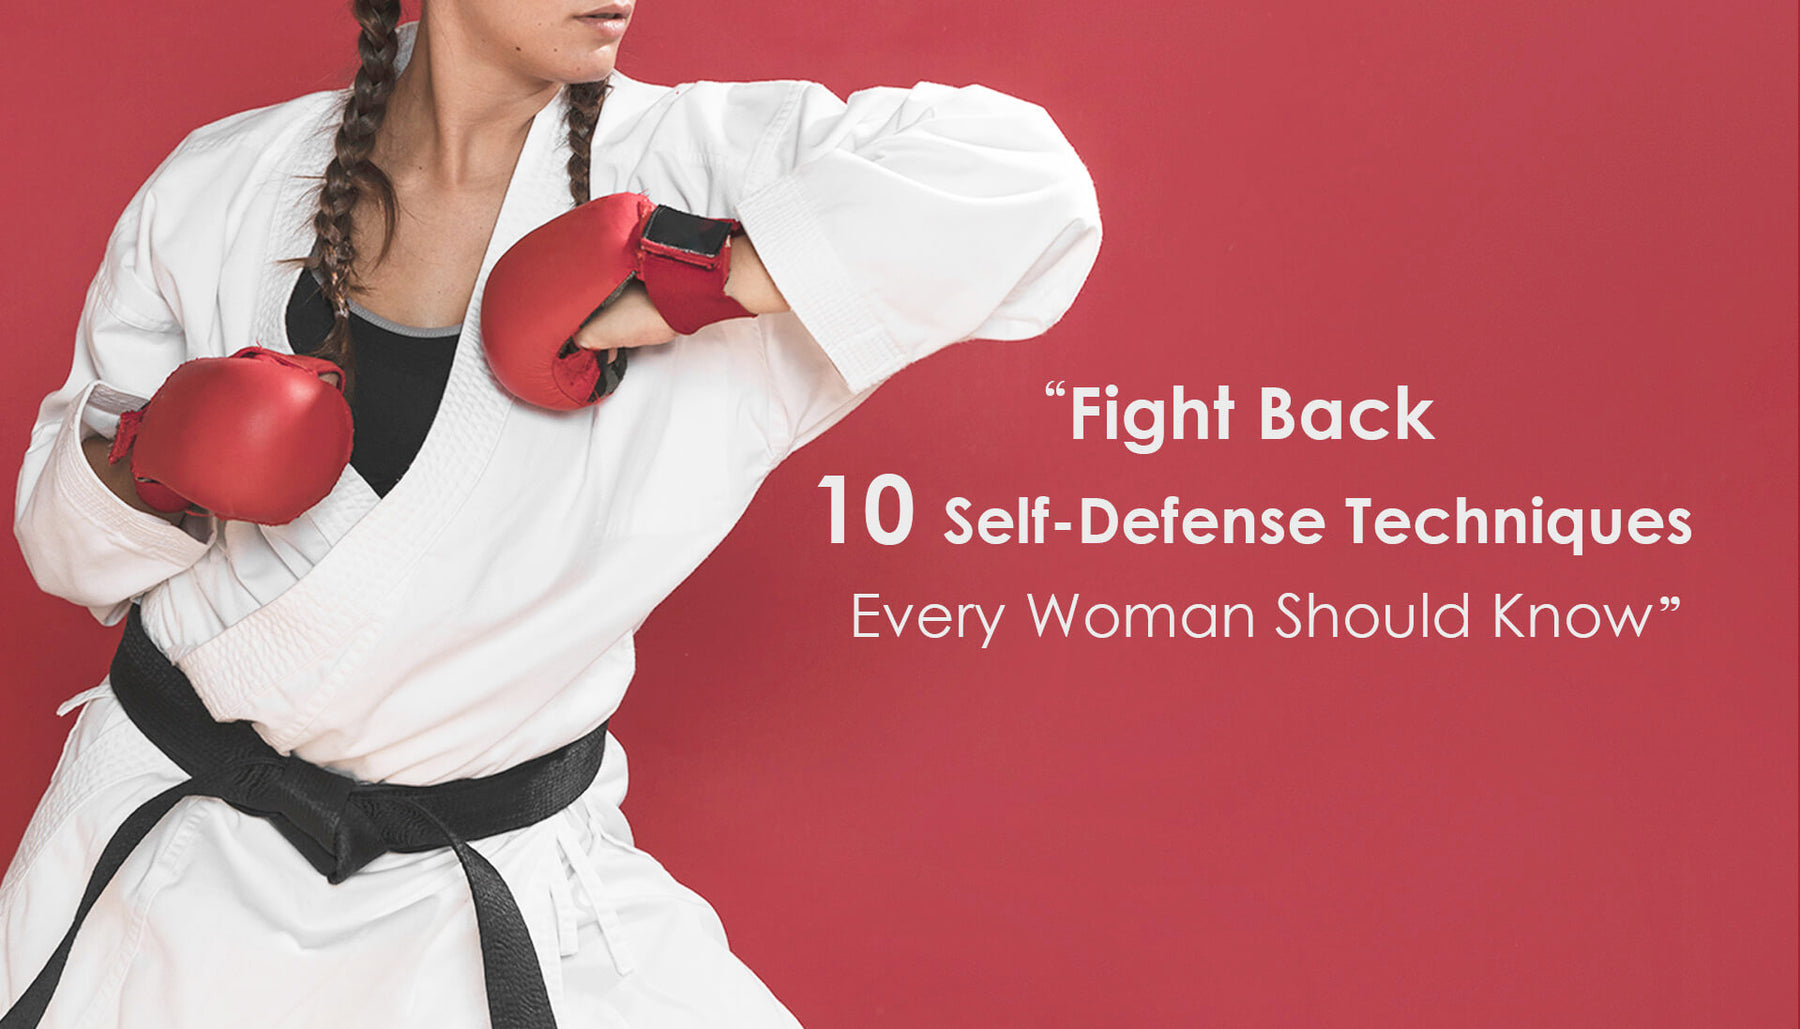 Fight Back: 10 Self-Defense Techniques Every Woman Should Know